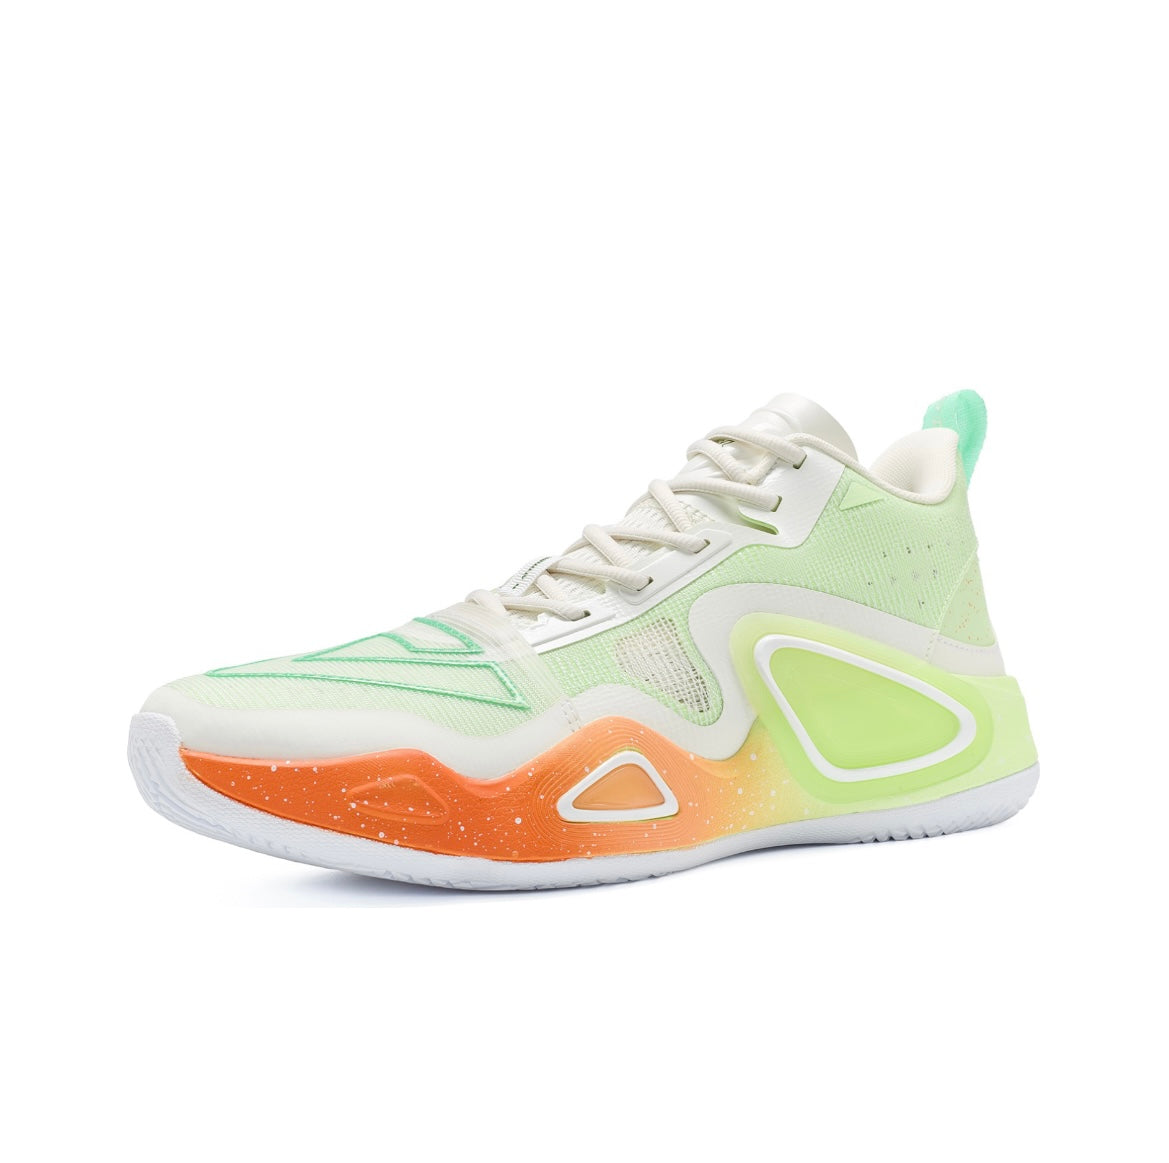 Peak Taichi Surging Big Triangle 2.0 Low Basketball Shoes - Energy